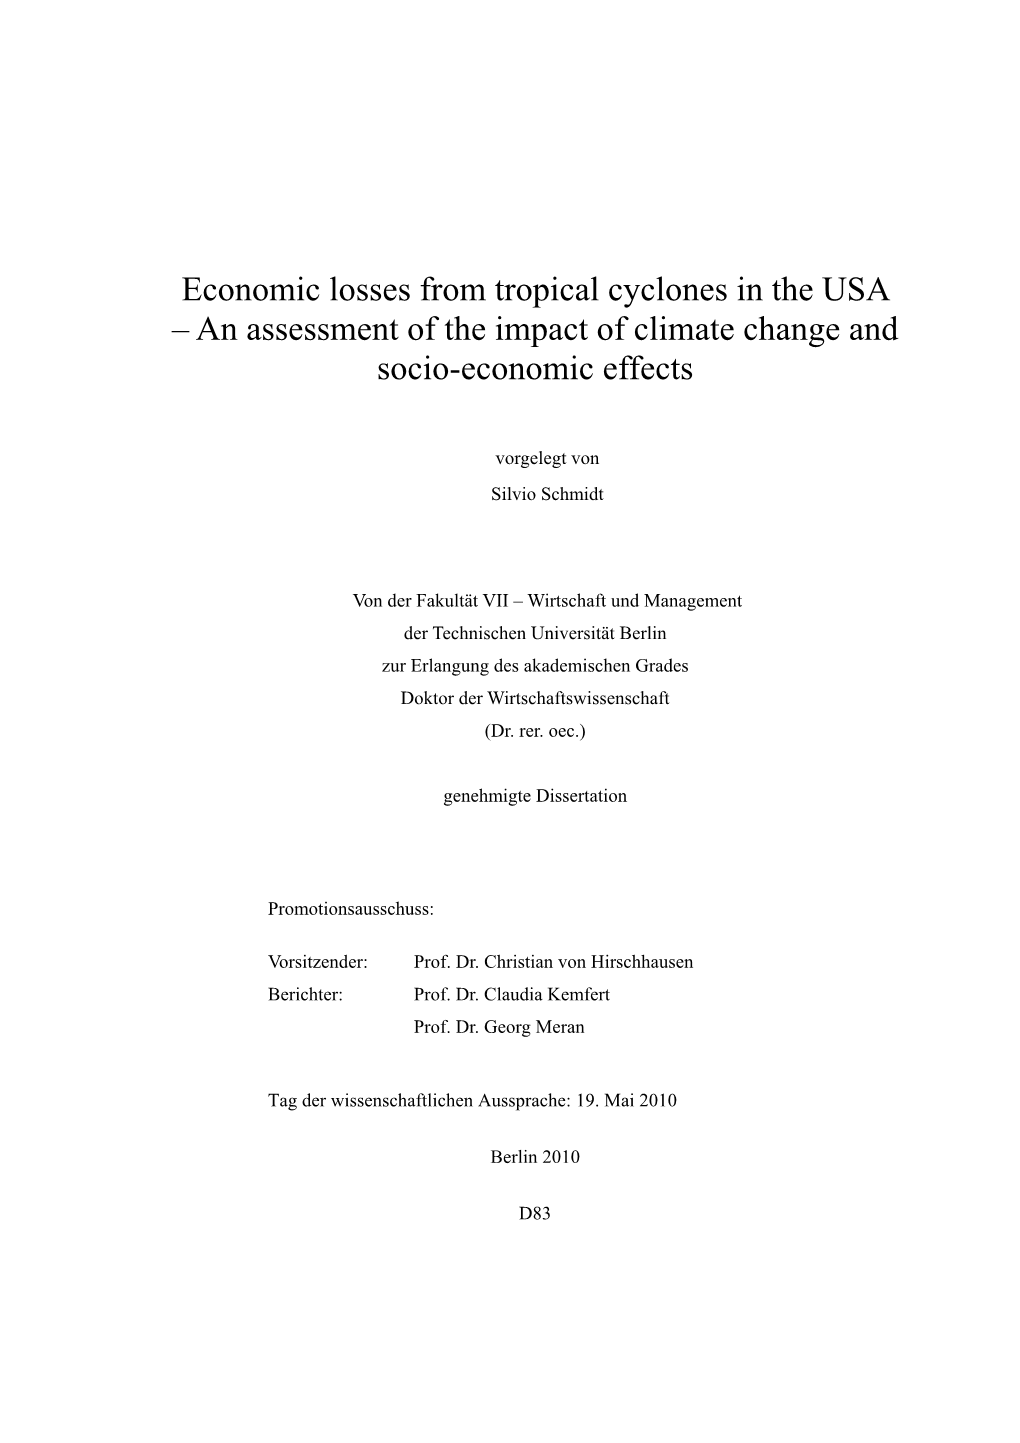 Economic Losses from Tropical Cyclones in the USA – an Assessment of the Impact of Climate Change and Socio-Economic Effects